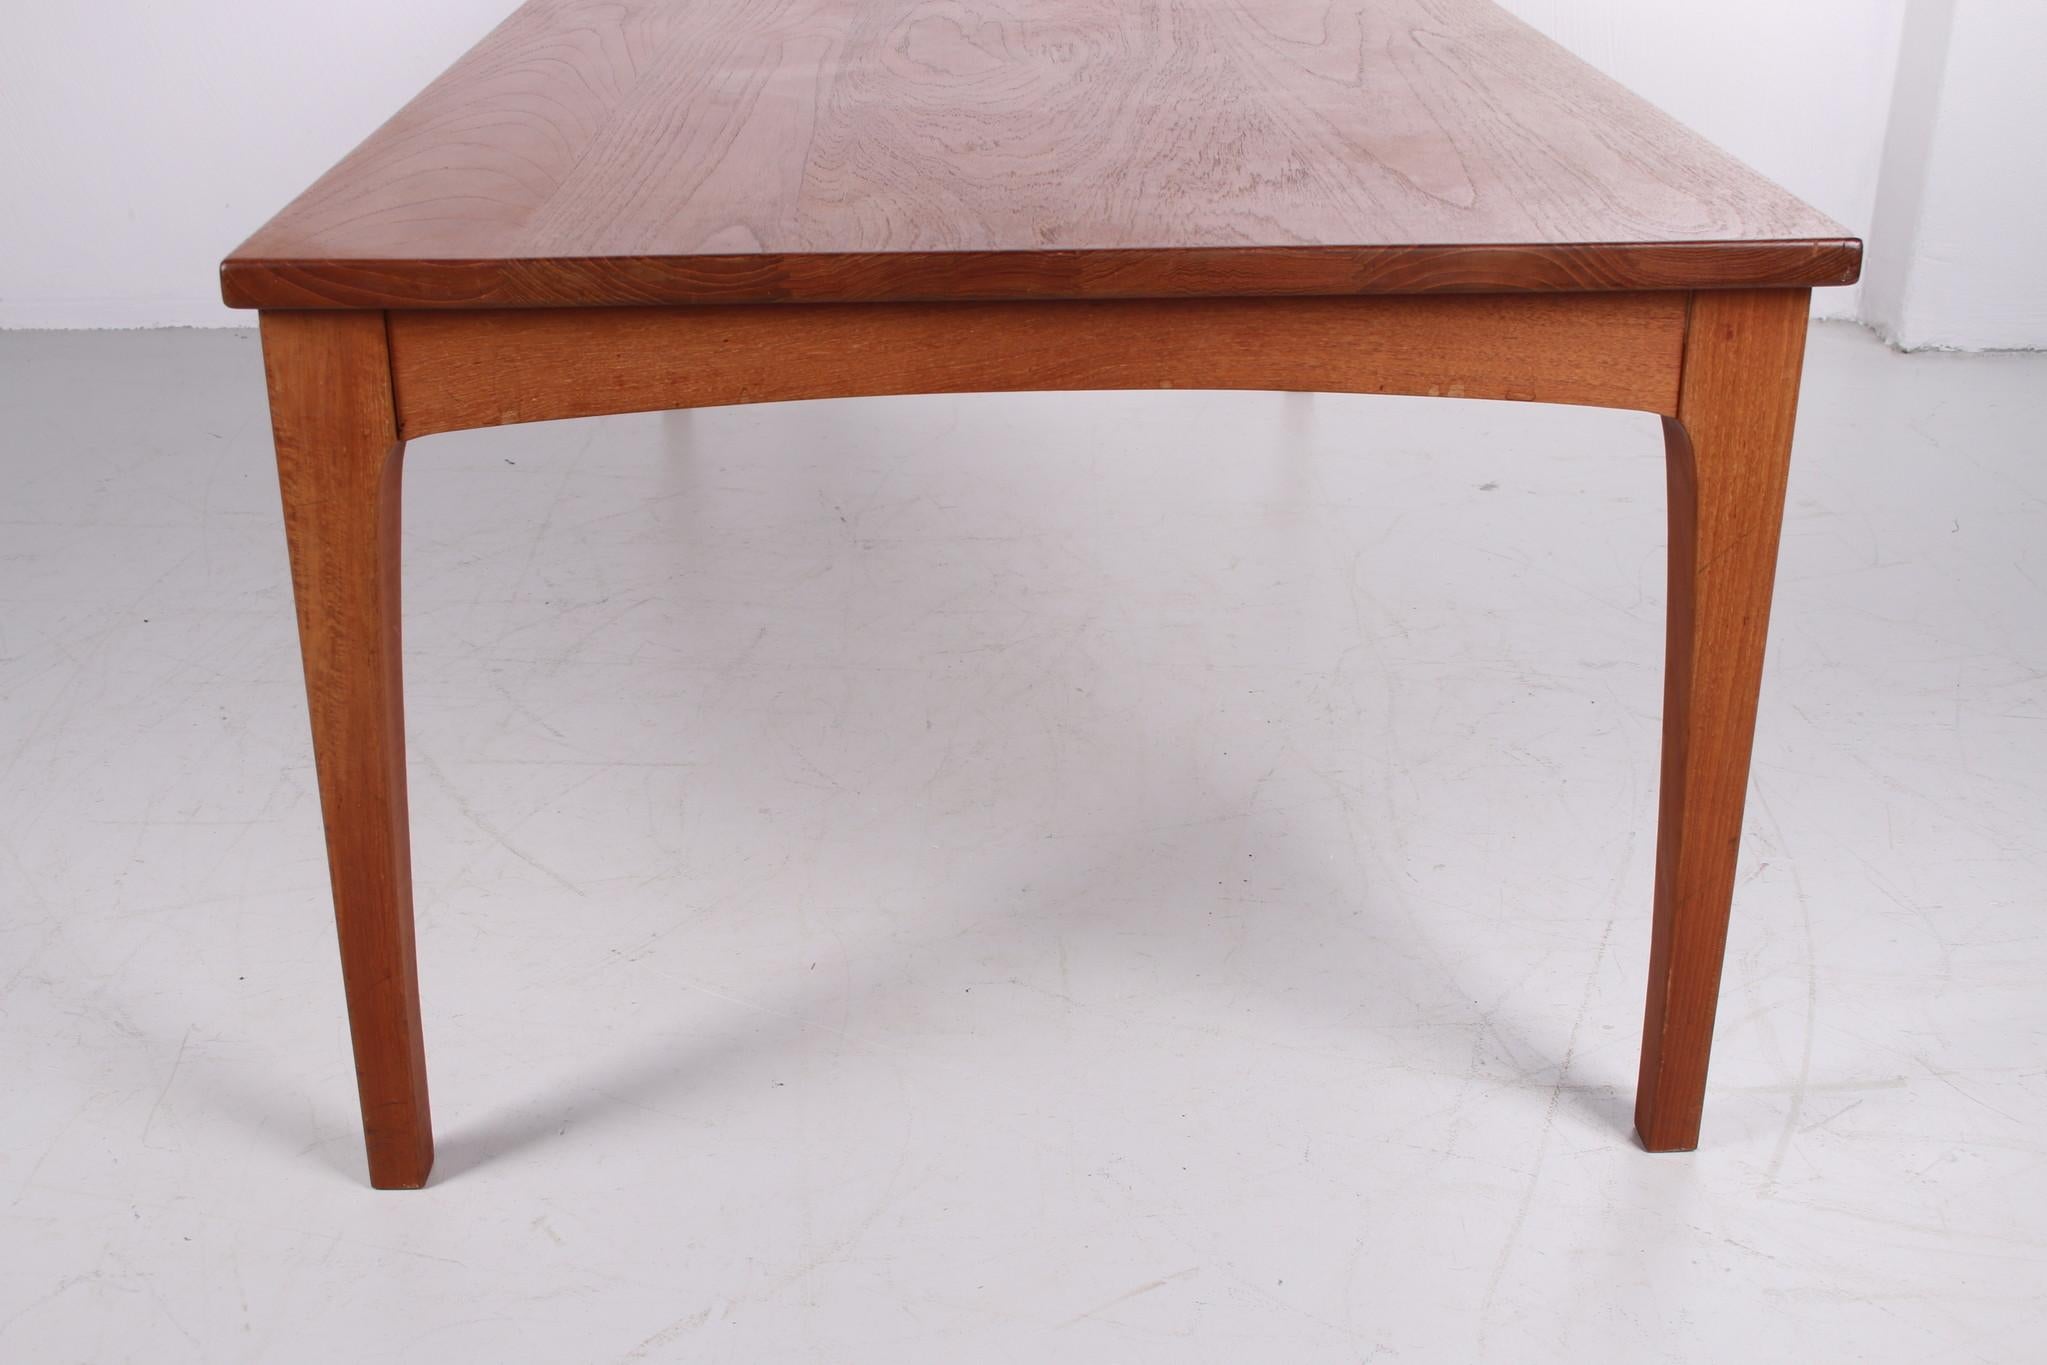 Danish Design Coffee Table from solid Teak design by Niels Bach 1960 For Sale 1